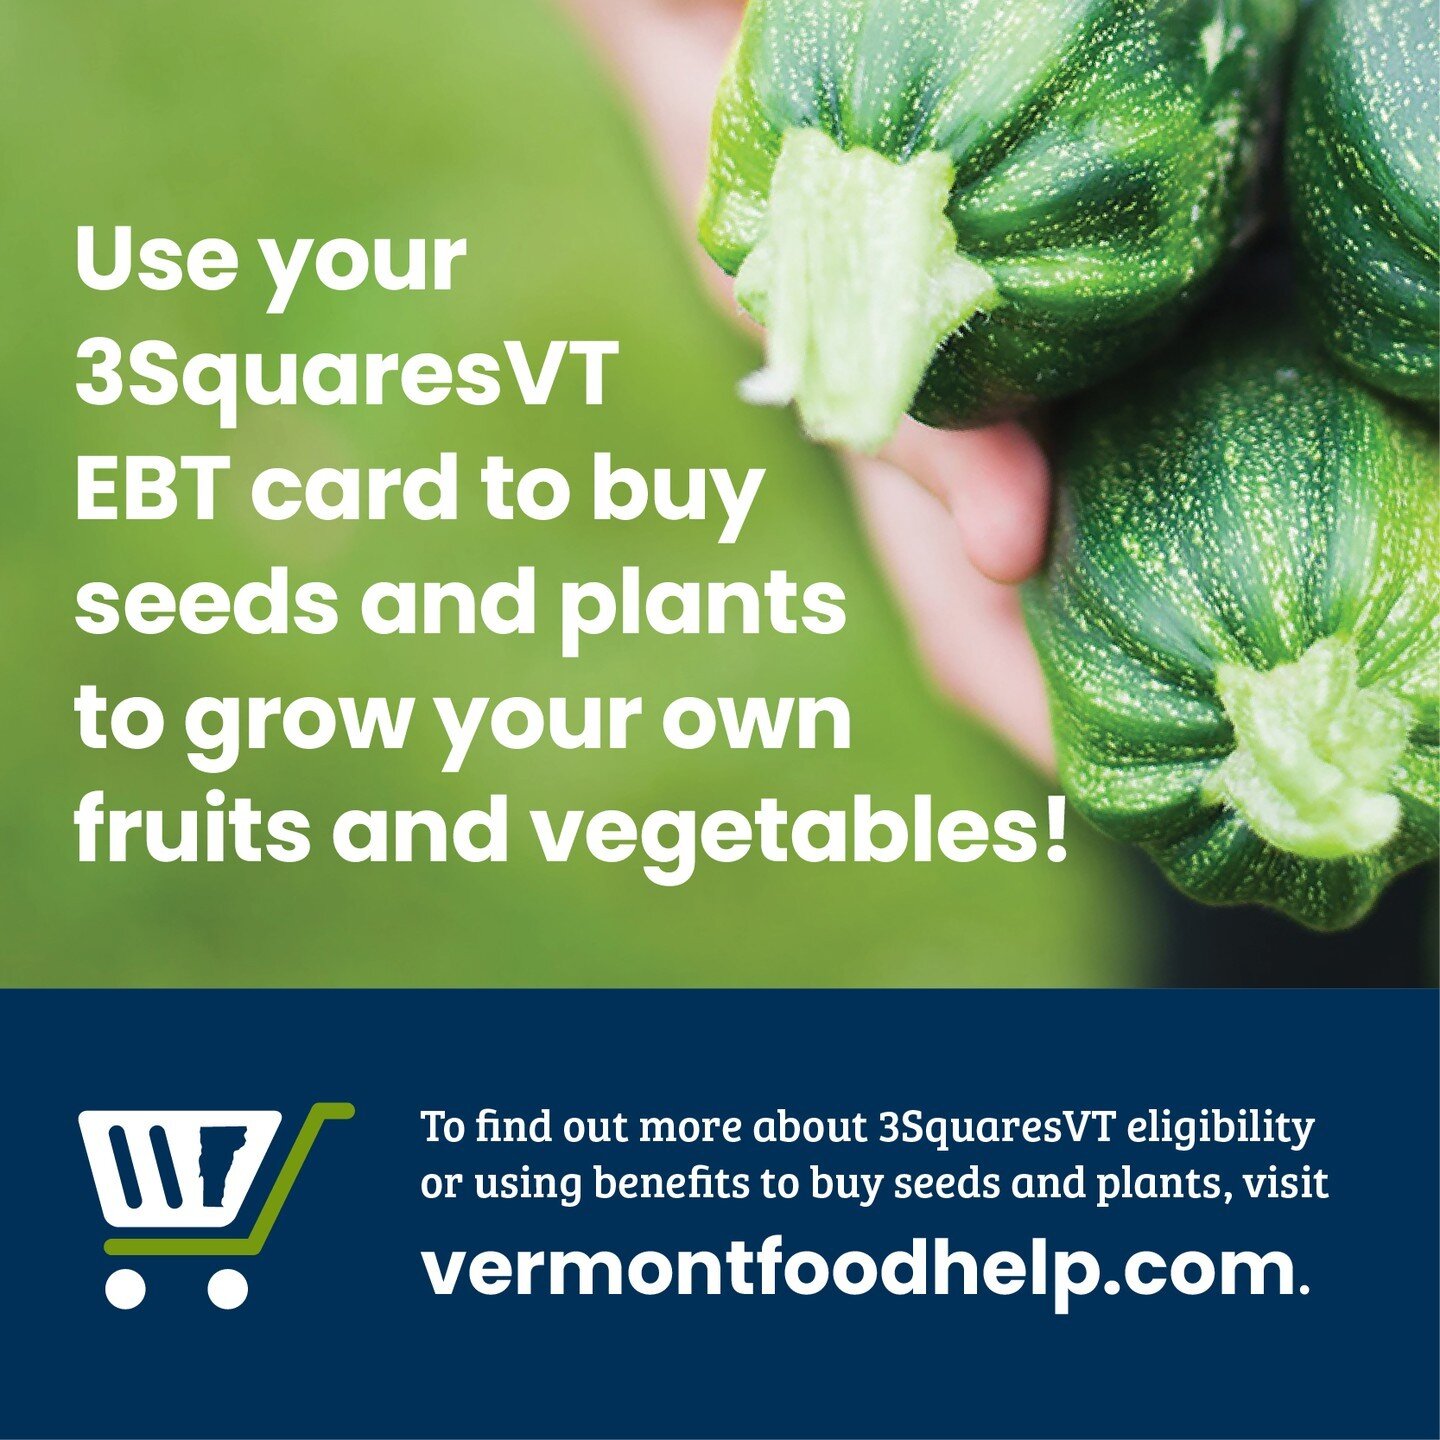 Does your spring garden need a boost? Kick off your planting with 3SquaresVT! 

You can use your monthly 3SquaresVT benefits to purchase fruit, vegetable and herb seeds and starter plants at participating retailers and farmers markets that accept EBT